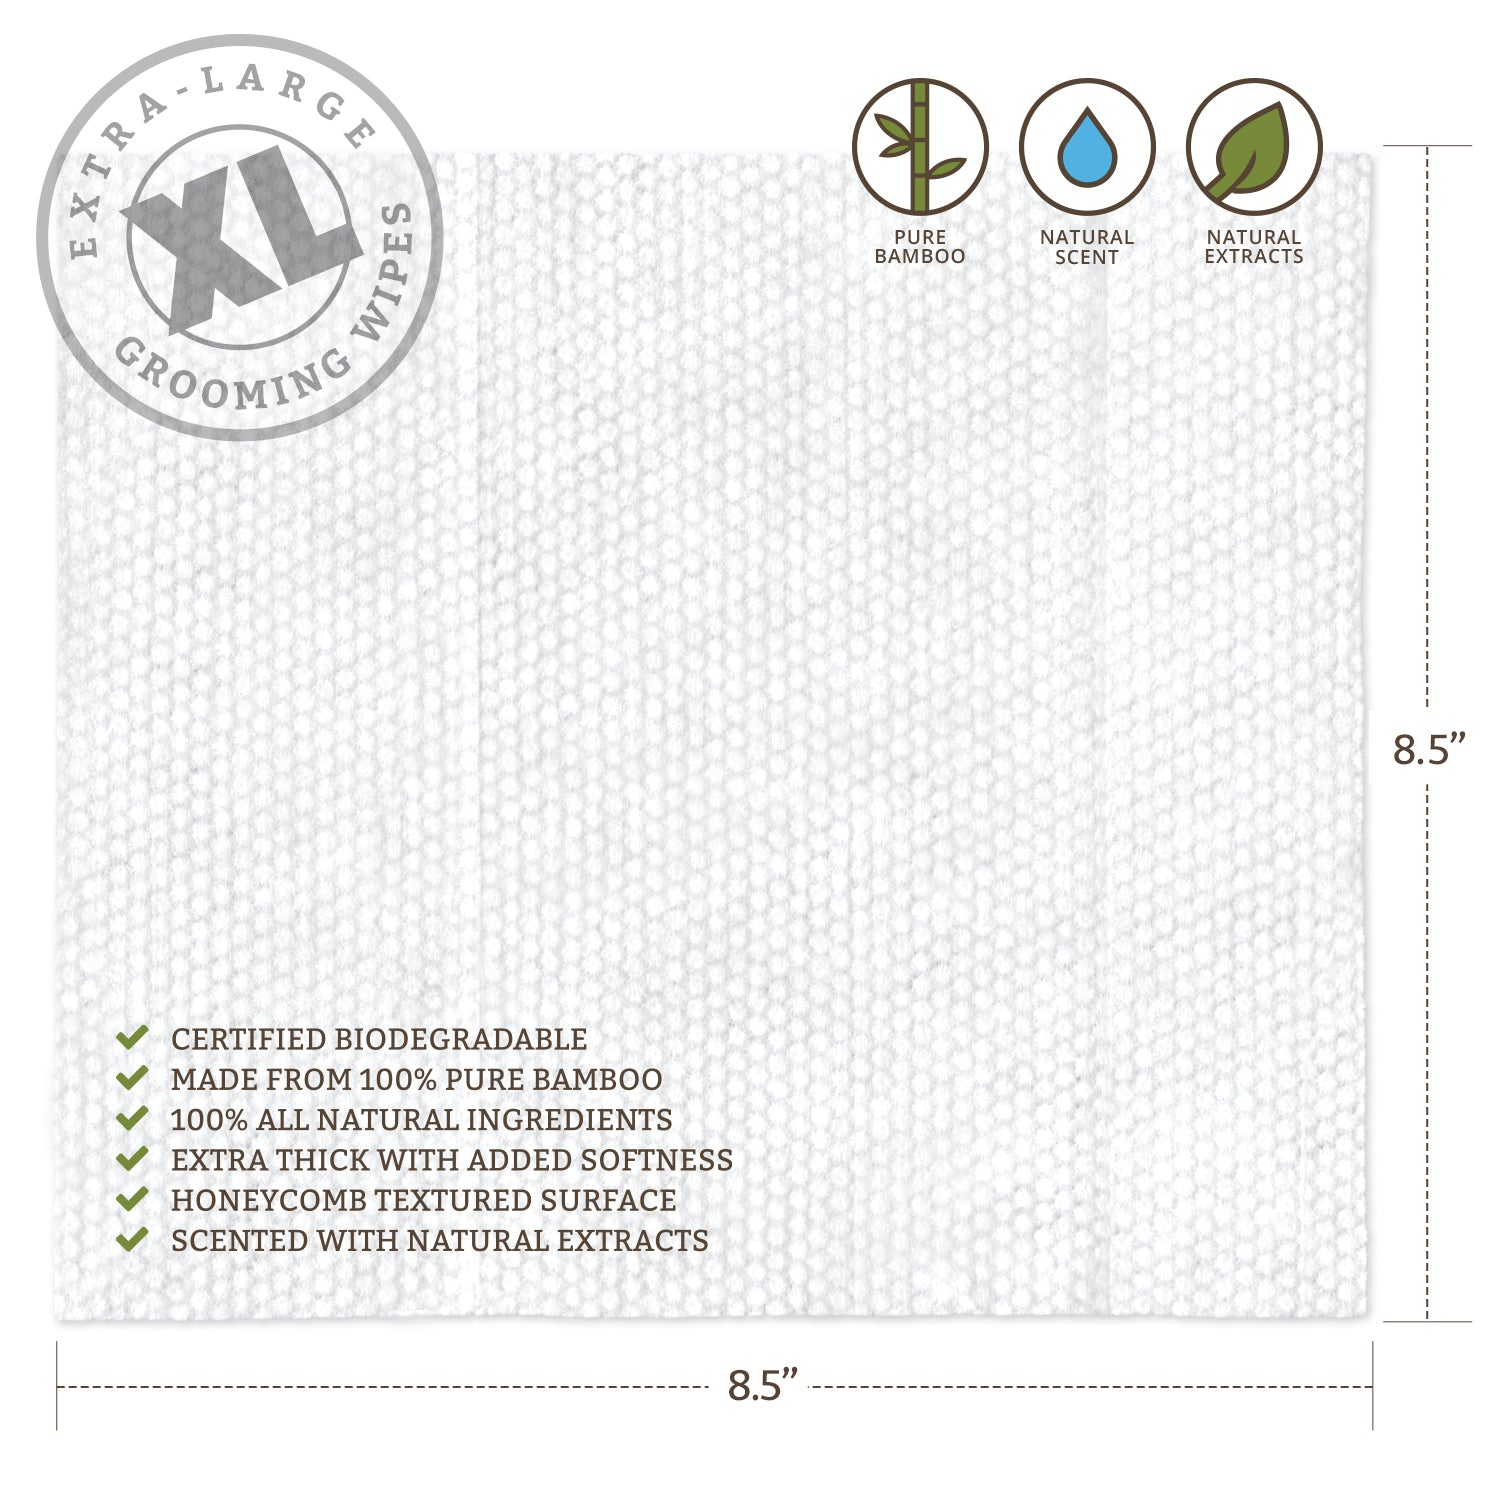 Biodegradable Grooming Wipes - Natural Scent (180 Wipes)